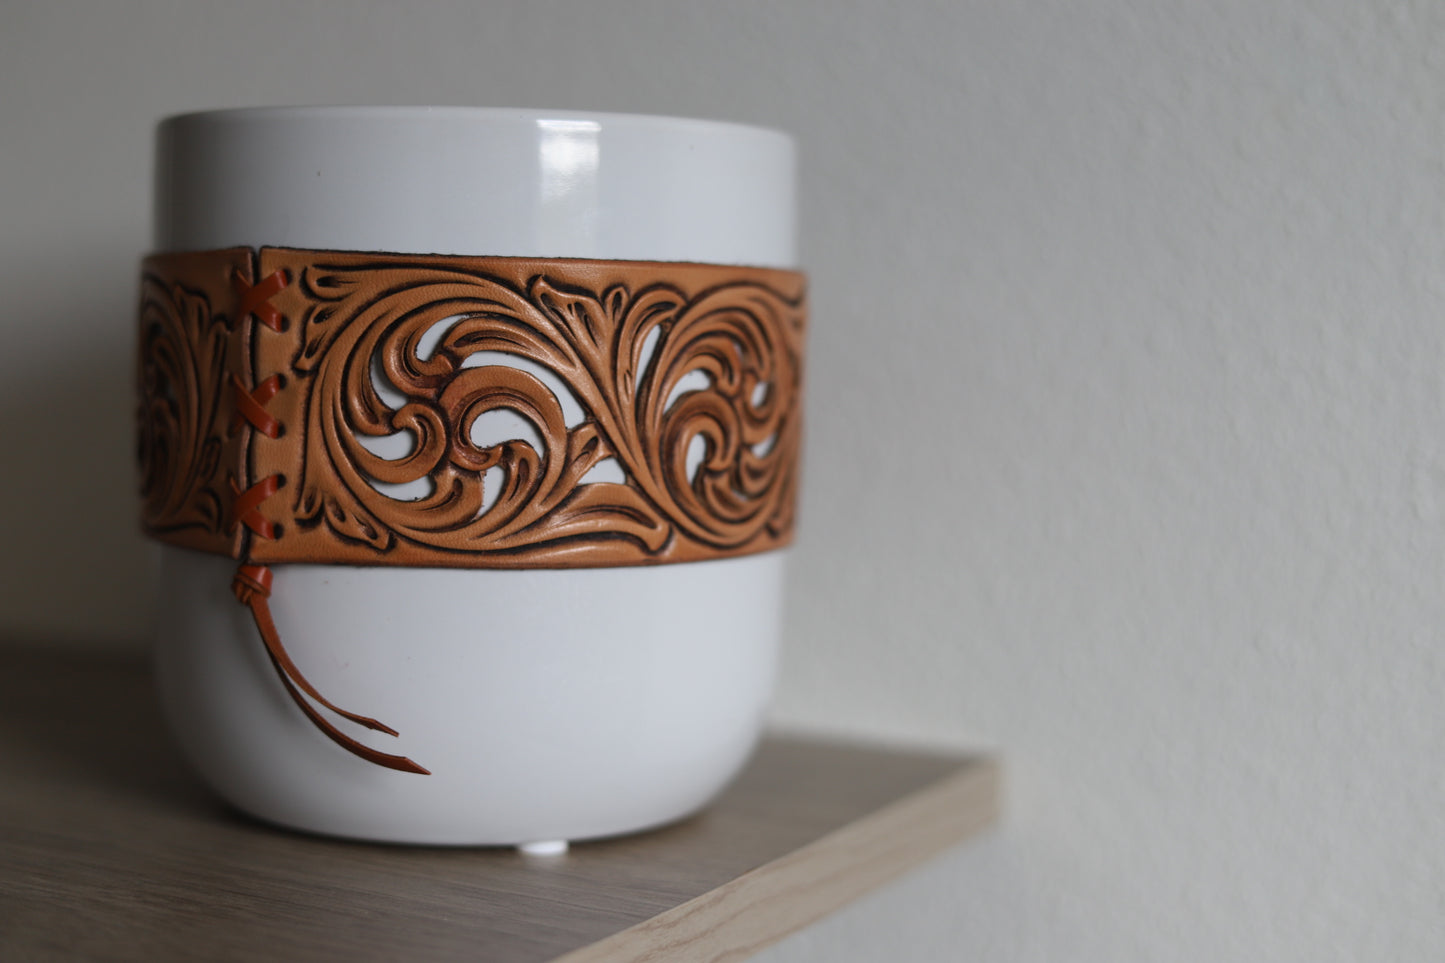 White Plant Pot with Tooled Leather Scrollwork Band